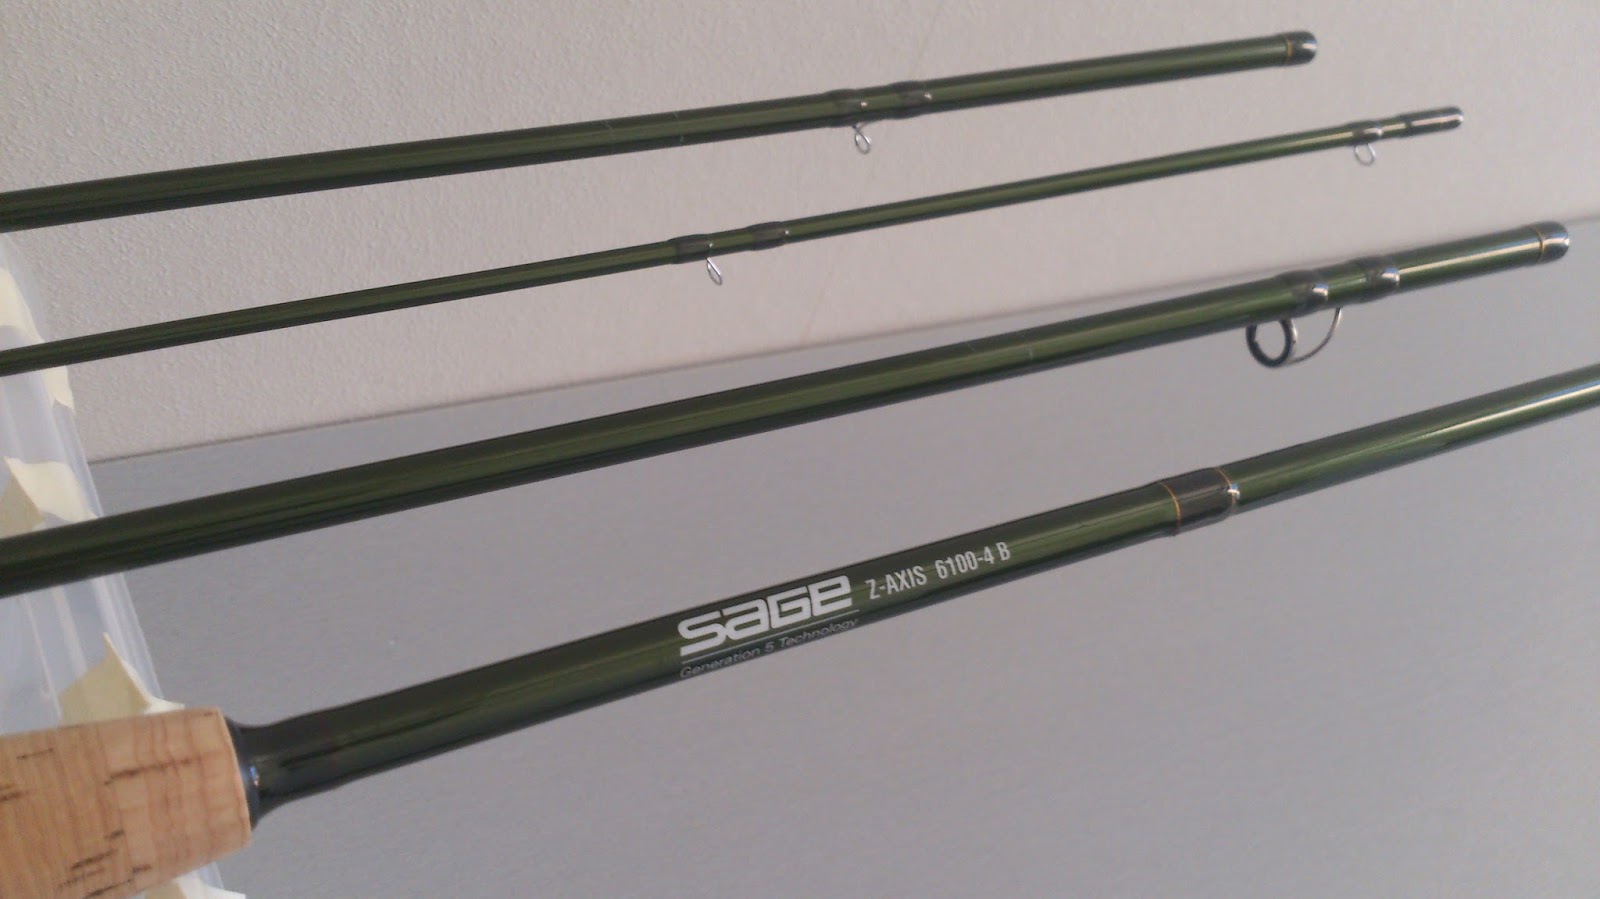 Rodbuilding-Piratefishing: Fly Rod reviews!